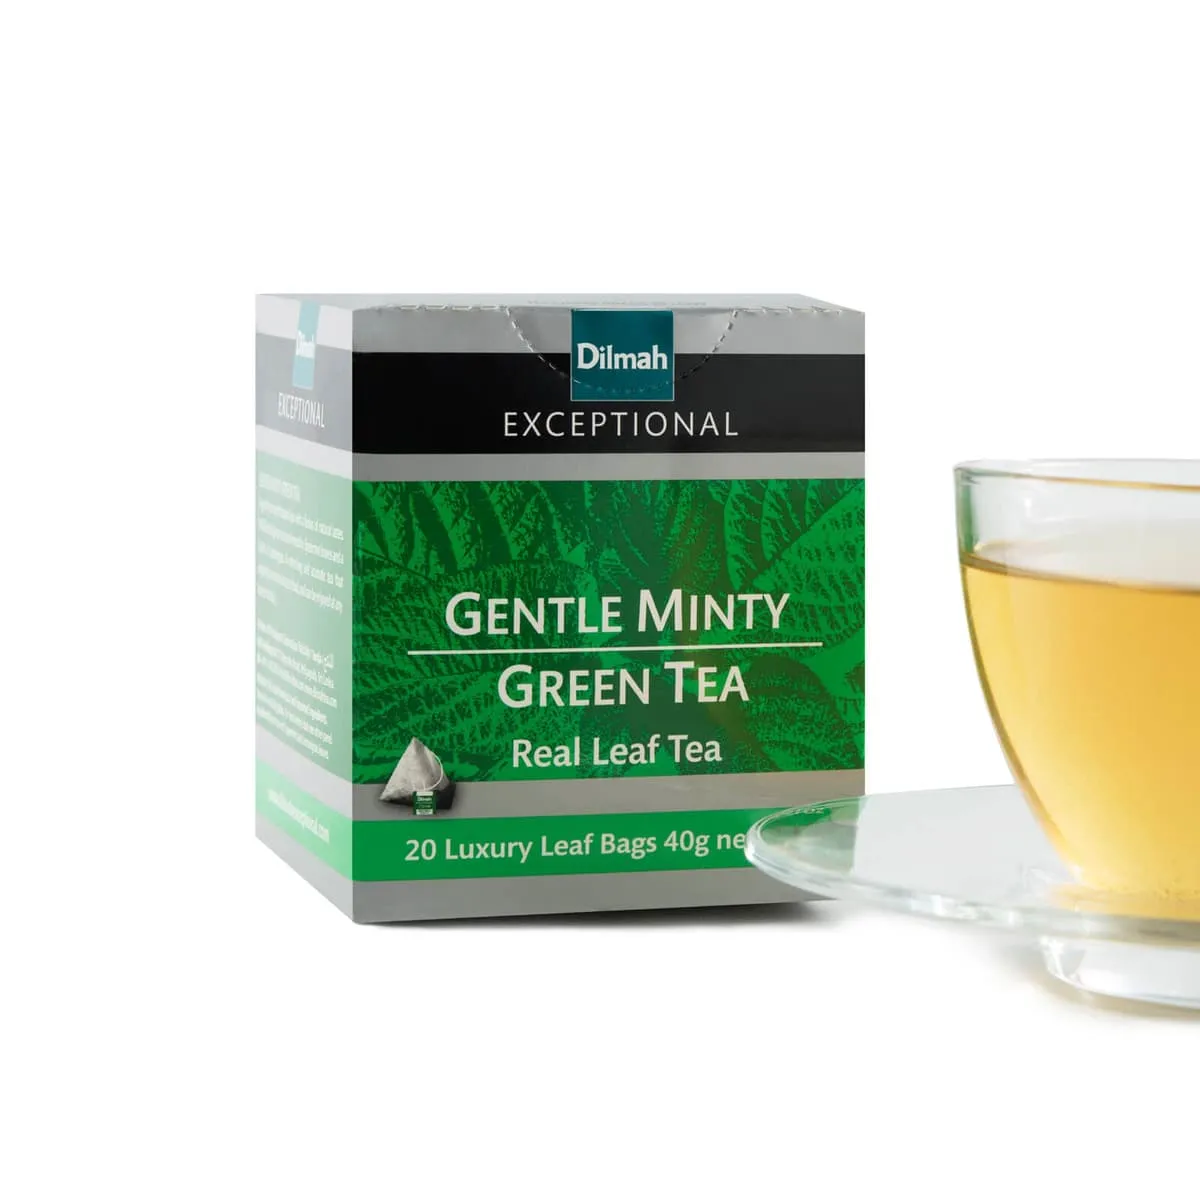 Minty green tea pack with cup of green tea